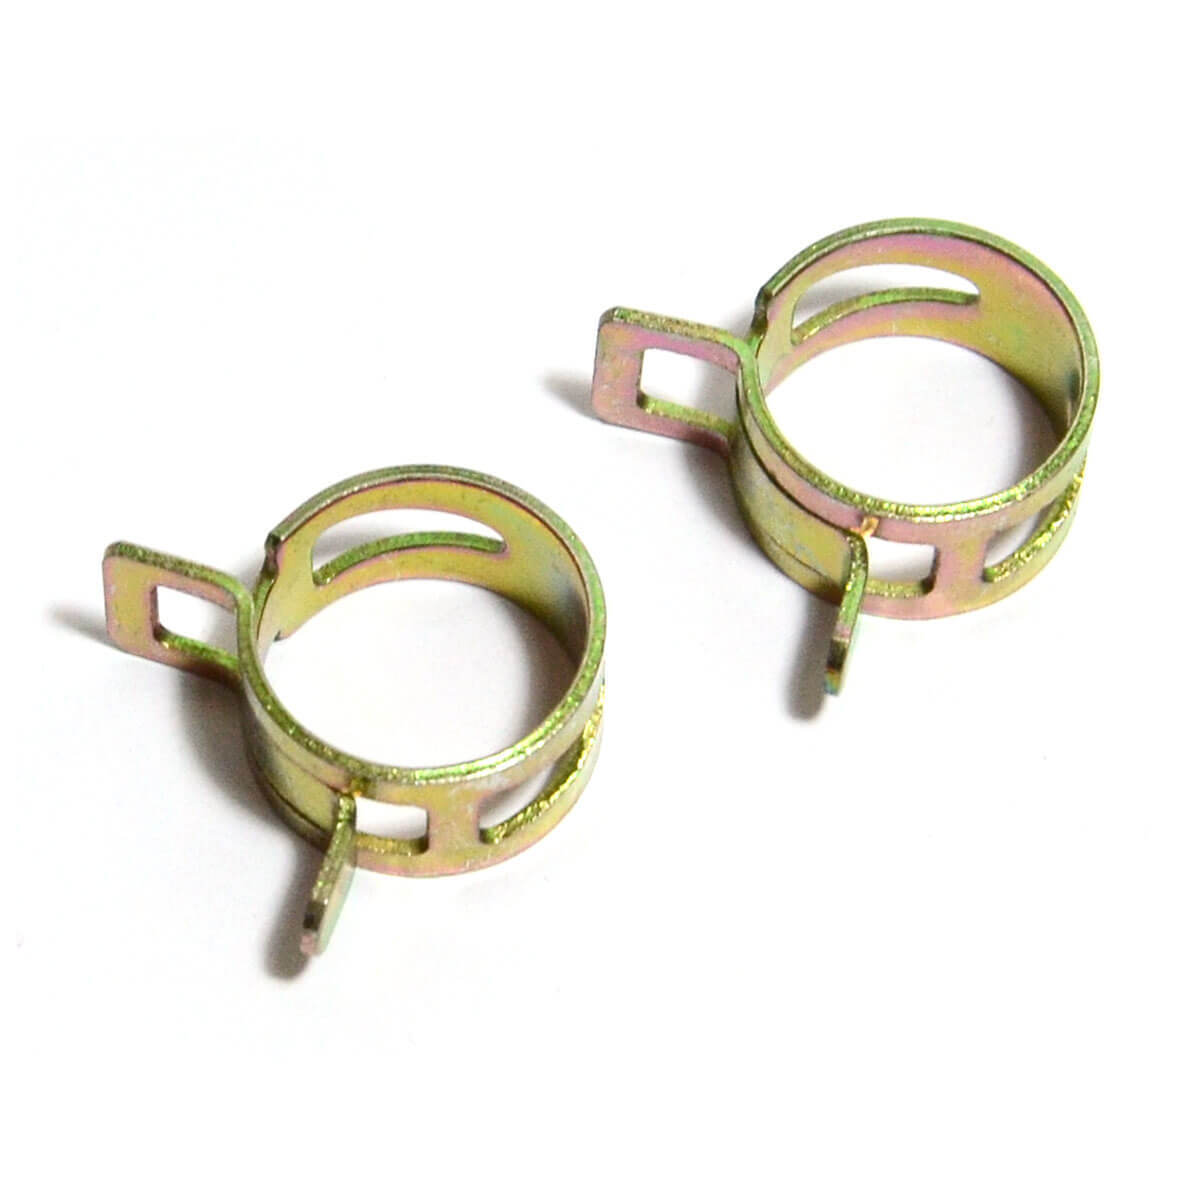 Hose Clamps Spring Size 14 suit 14mm (9/16") hose Pack of 2